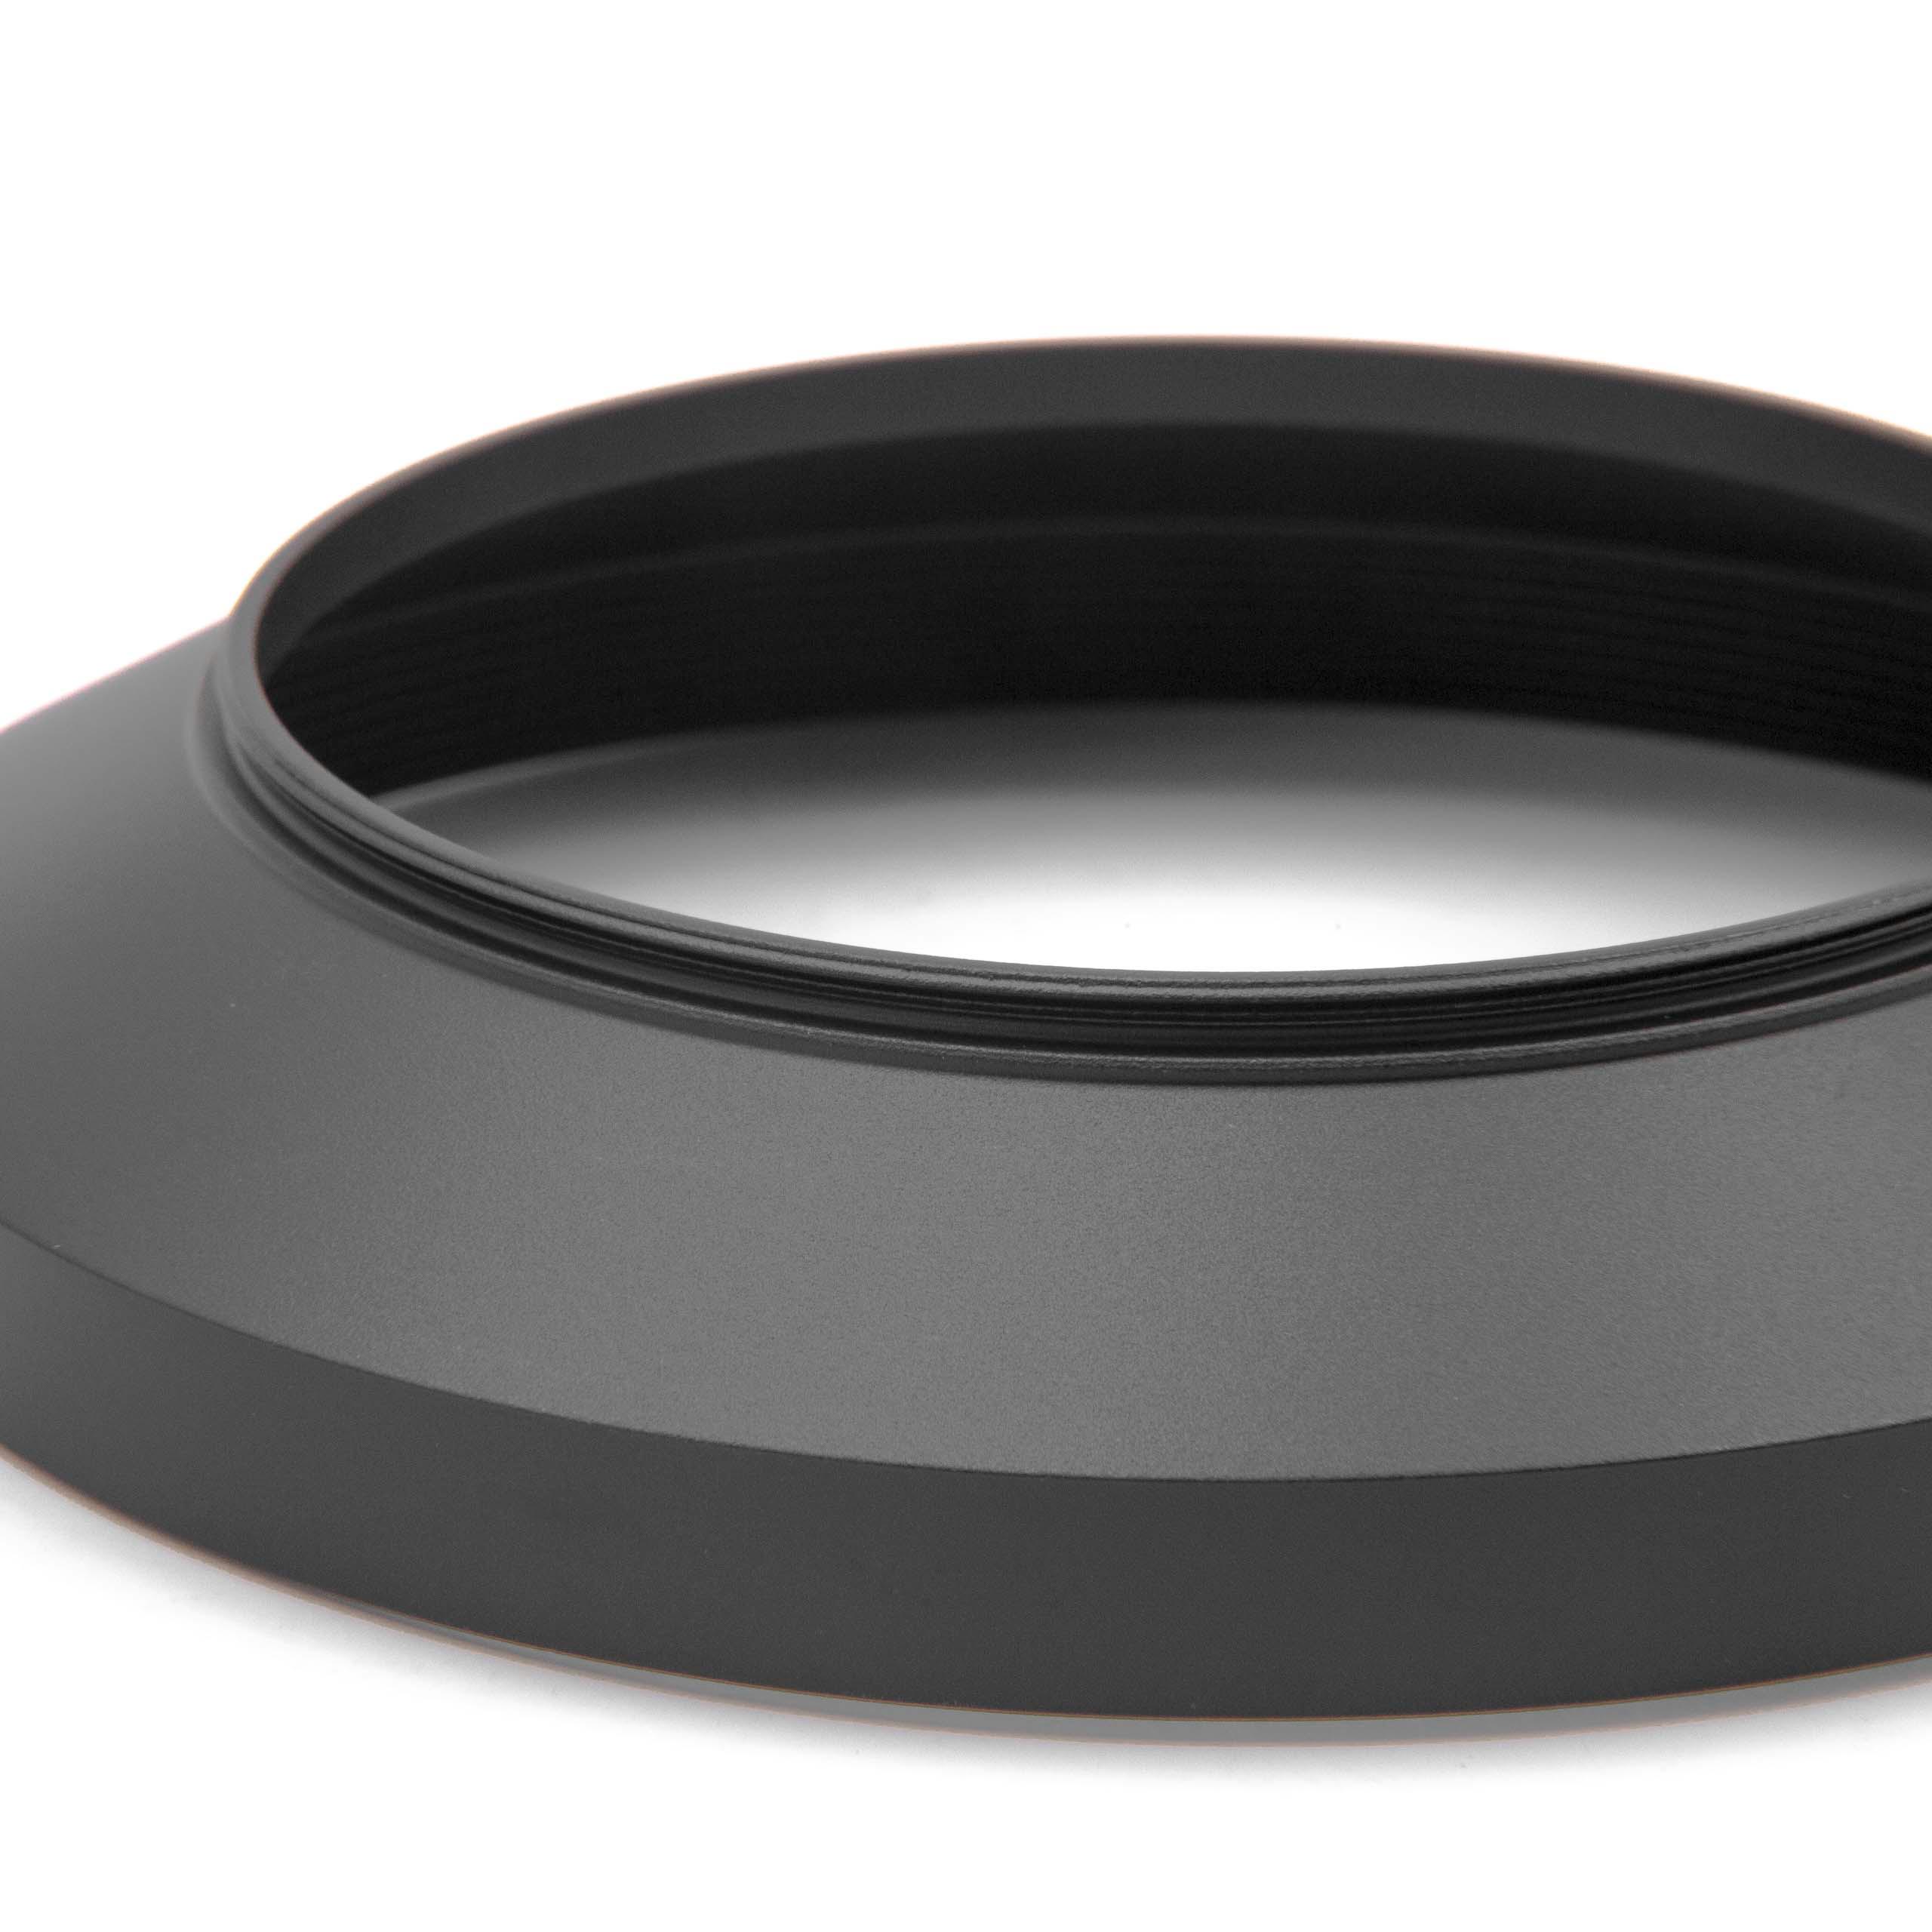 Lens Hood suitable for 77mm Lens - Wide-Angle Lens Shade Black, Round